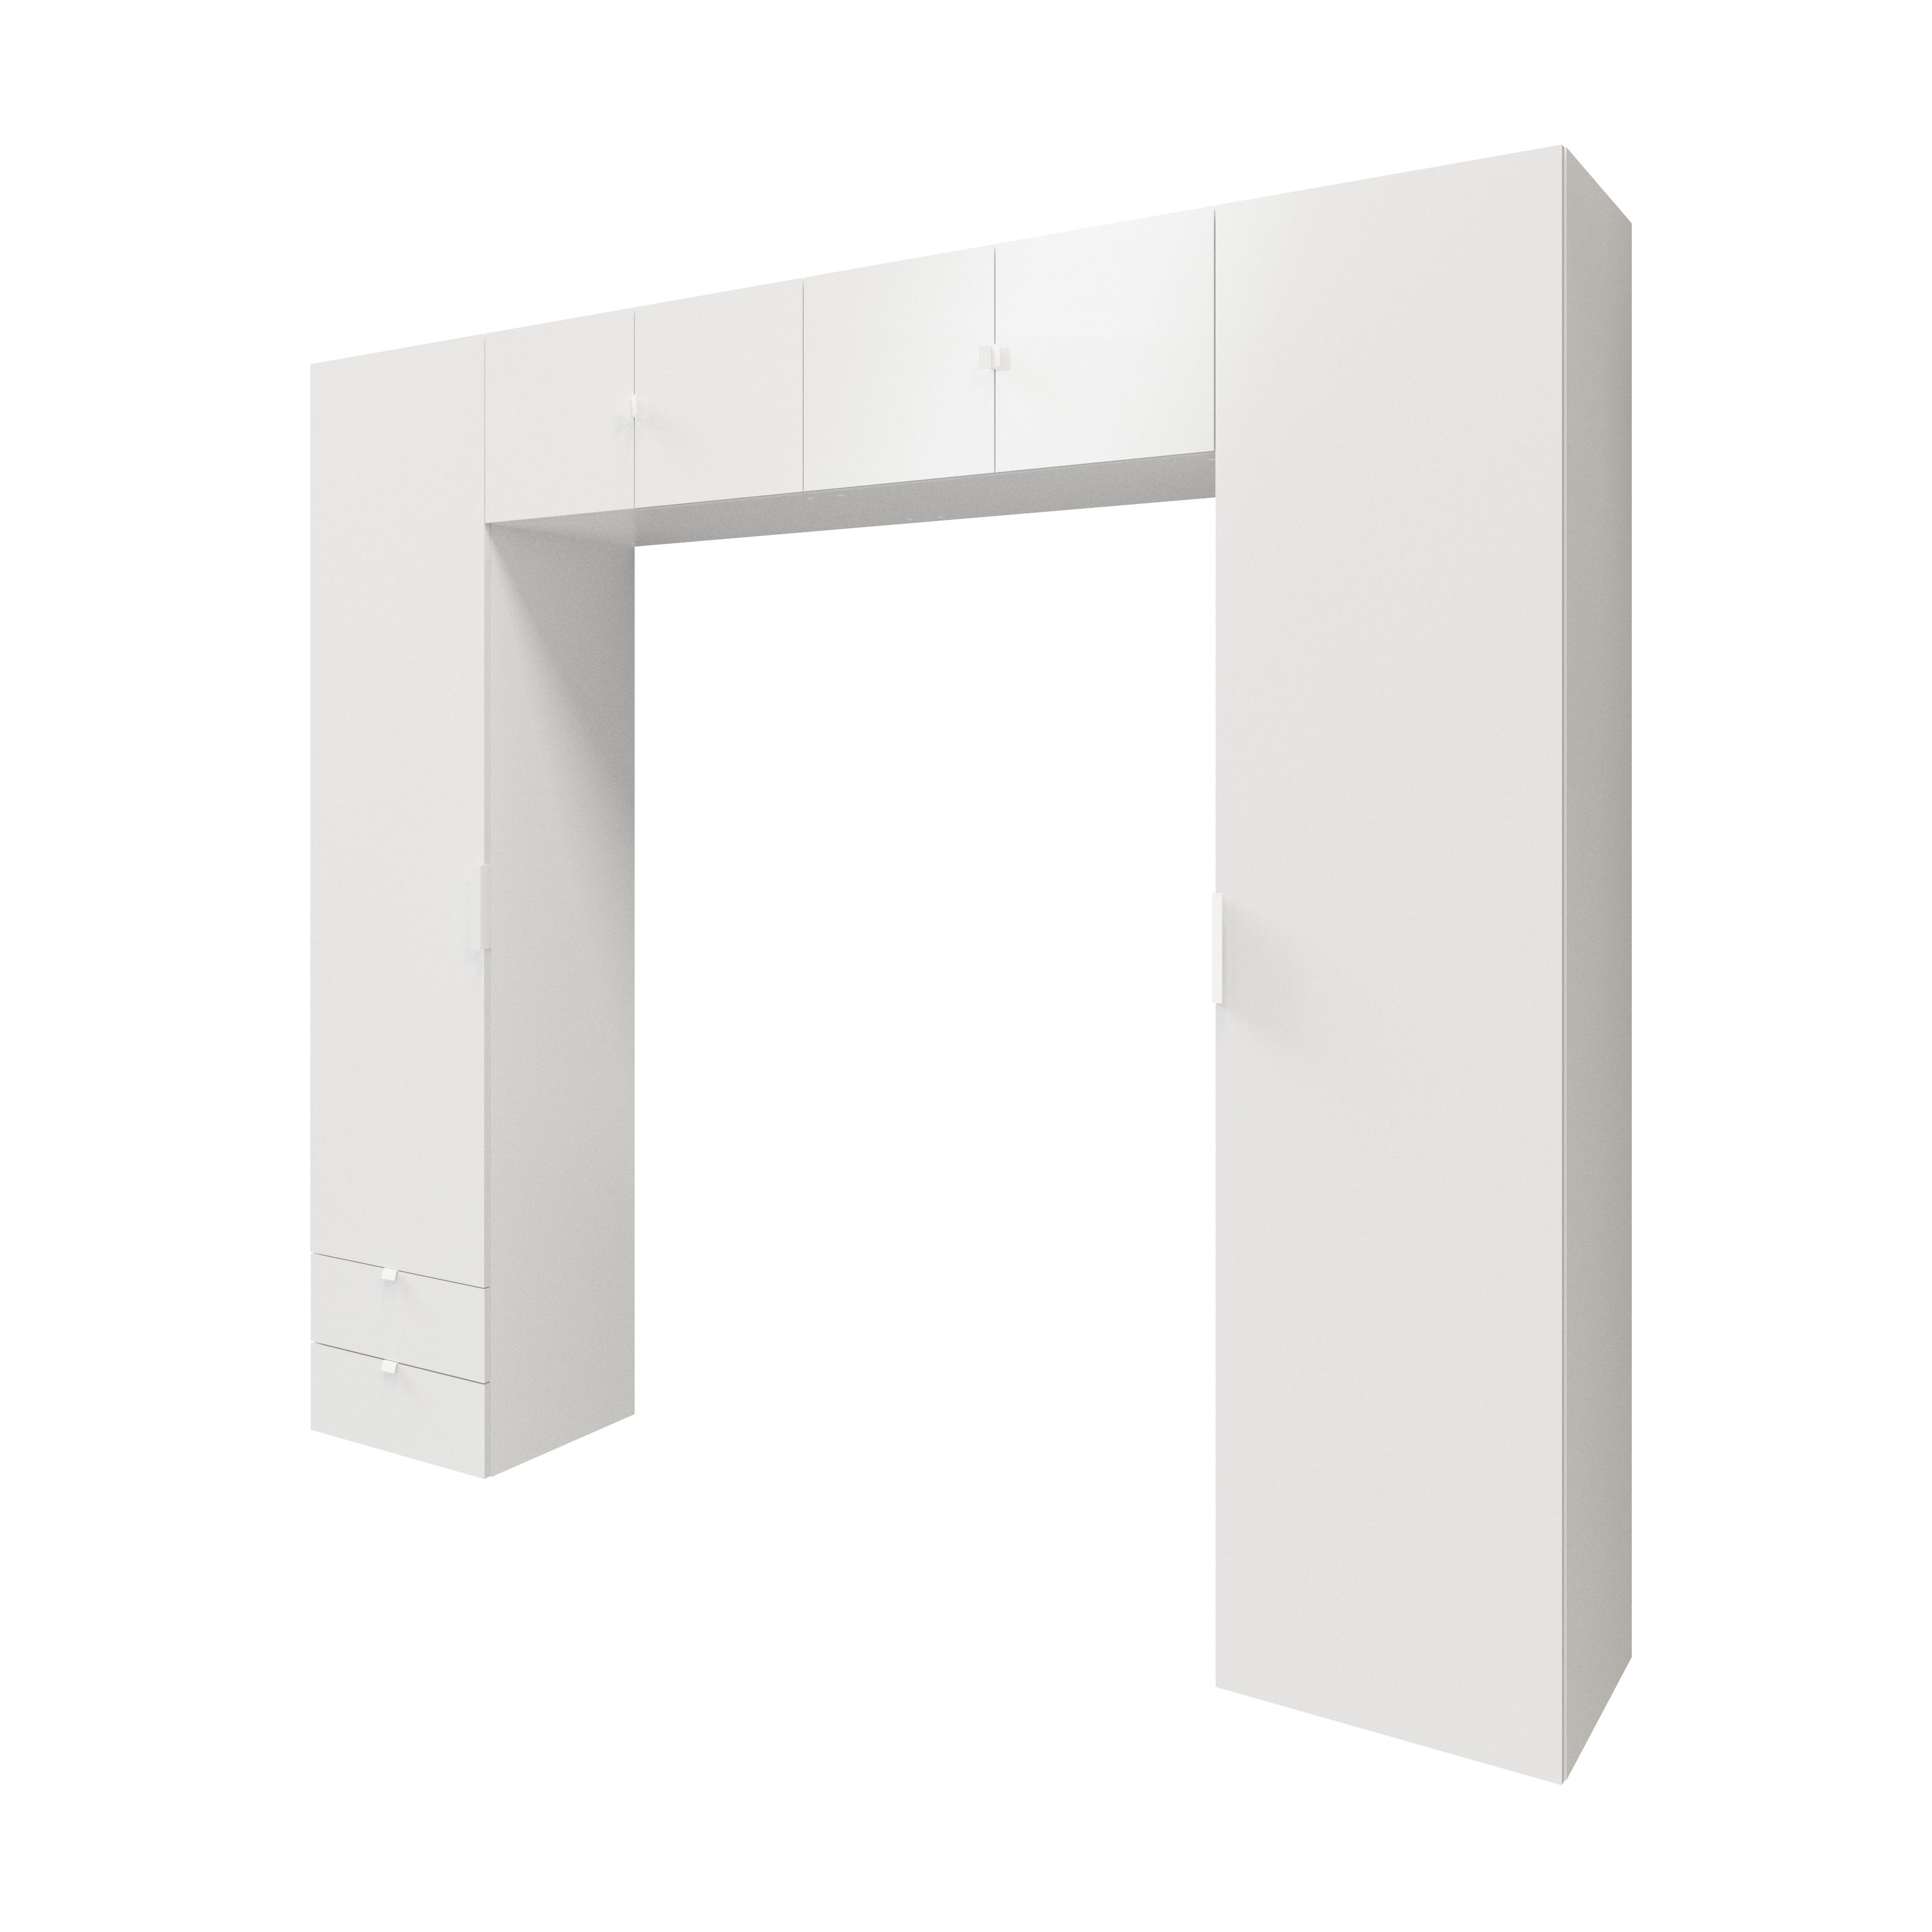 GoodHome Atomia White Door, White Overhead unit (H)2250mm (W)2500mm (D)450mm